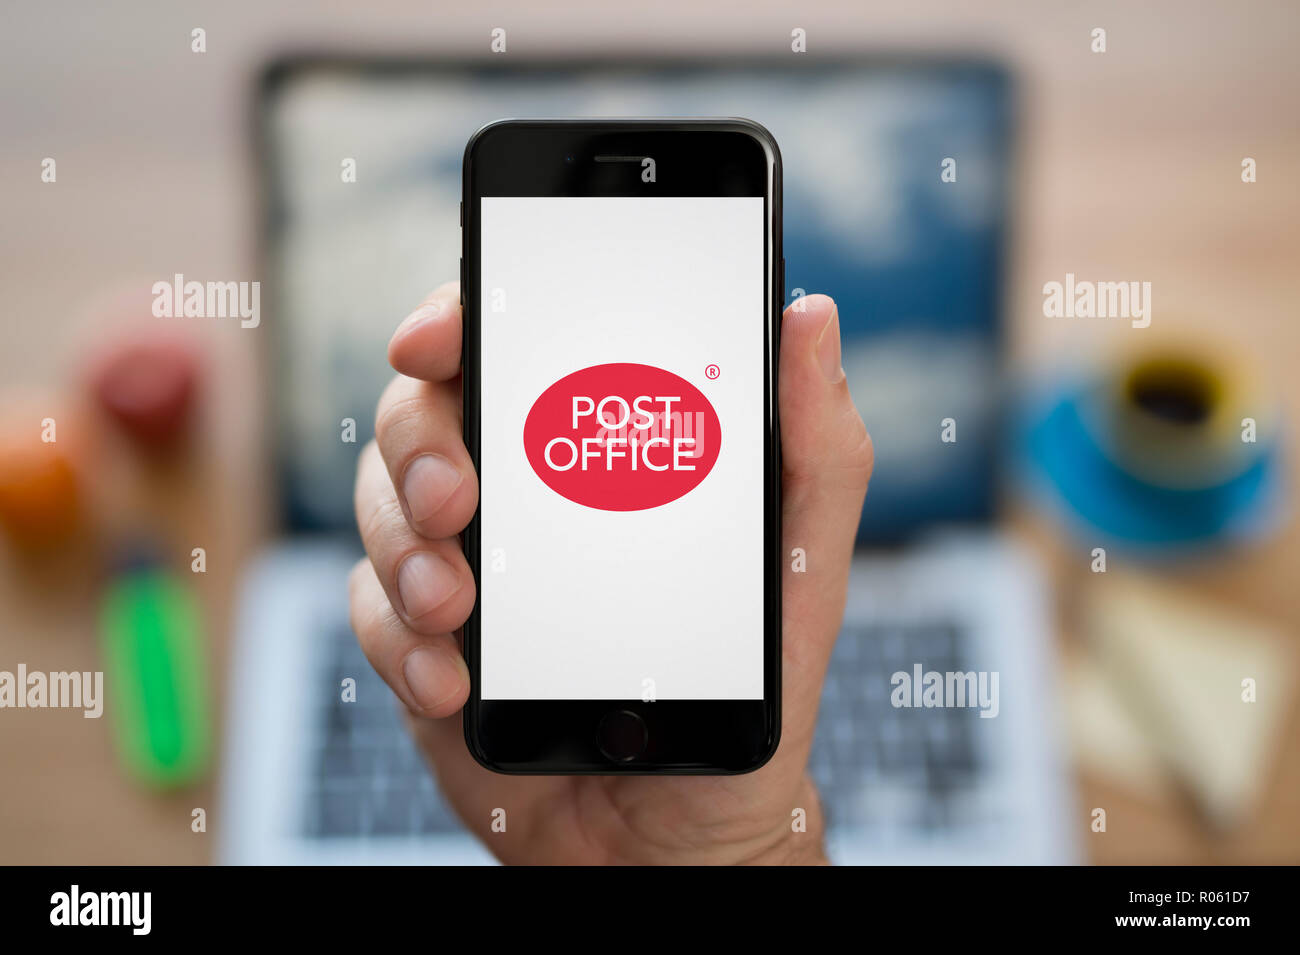 A man looks at his iPhone which displays the Post Office logo, while sat at his computer desk (Editorial use only). Stock Photo